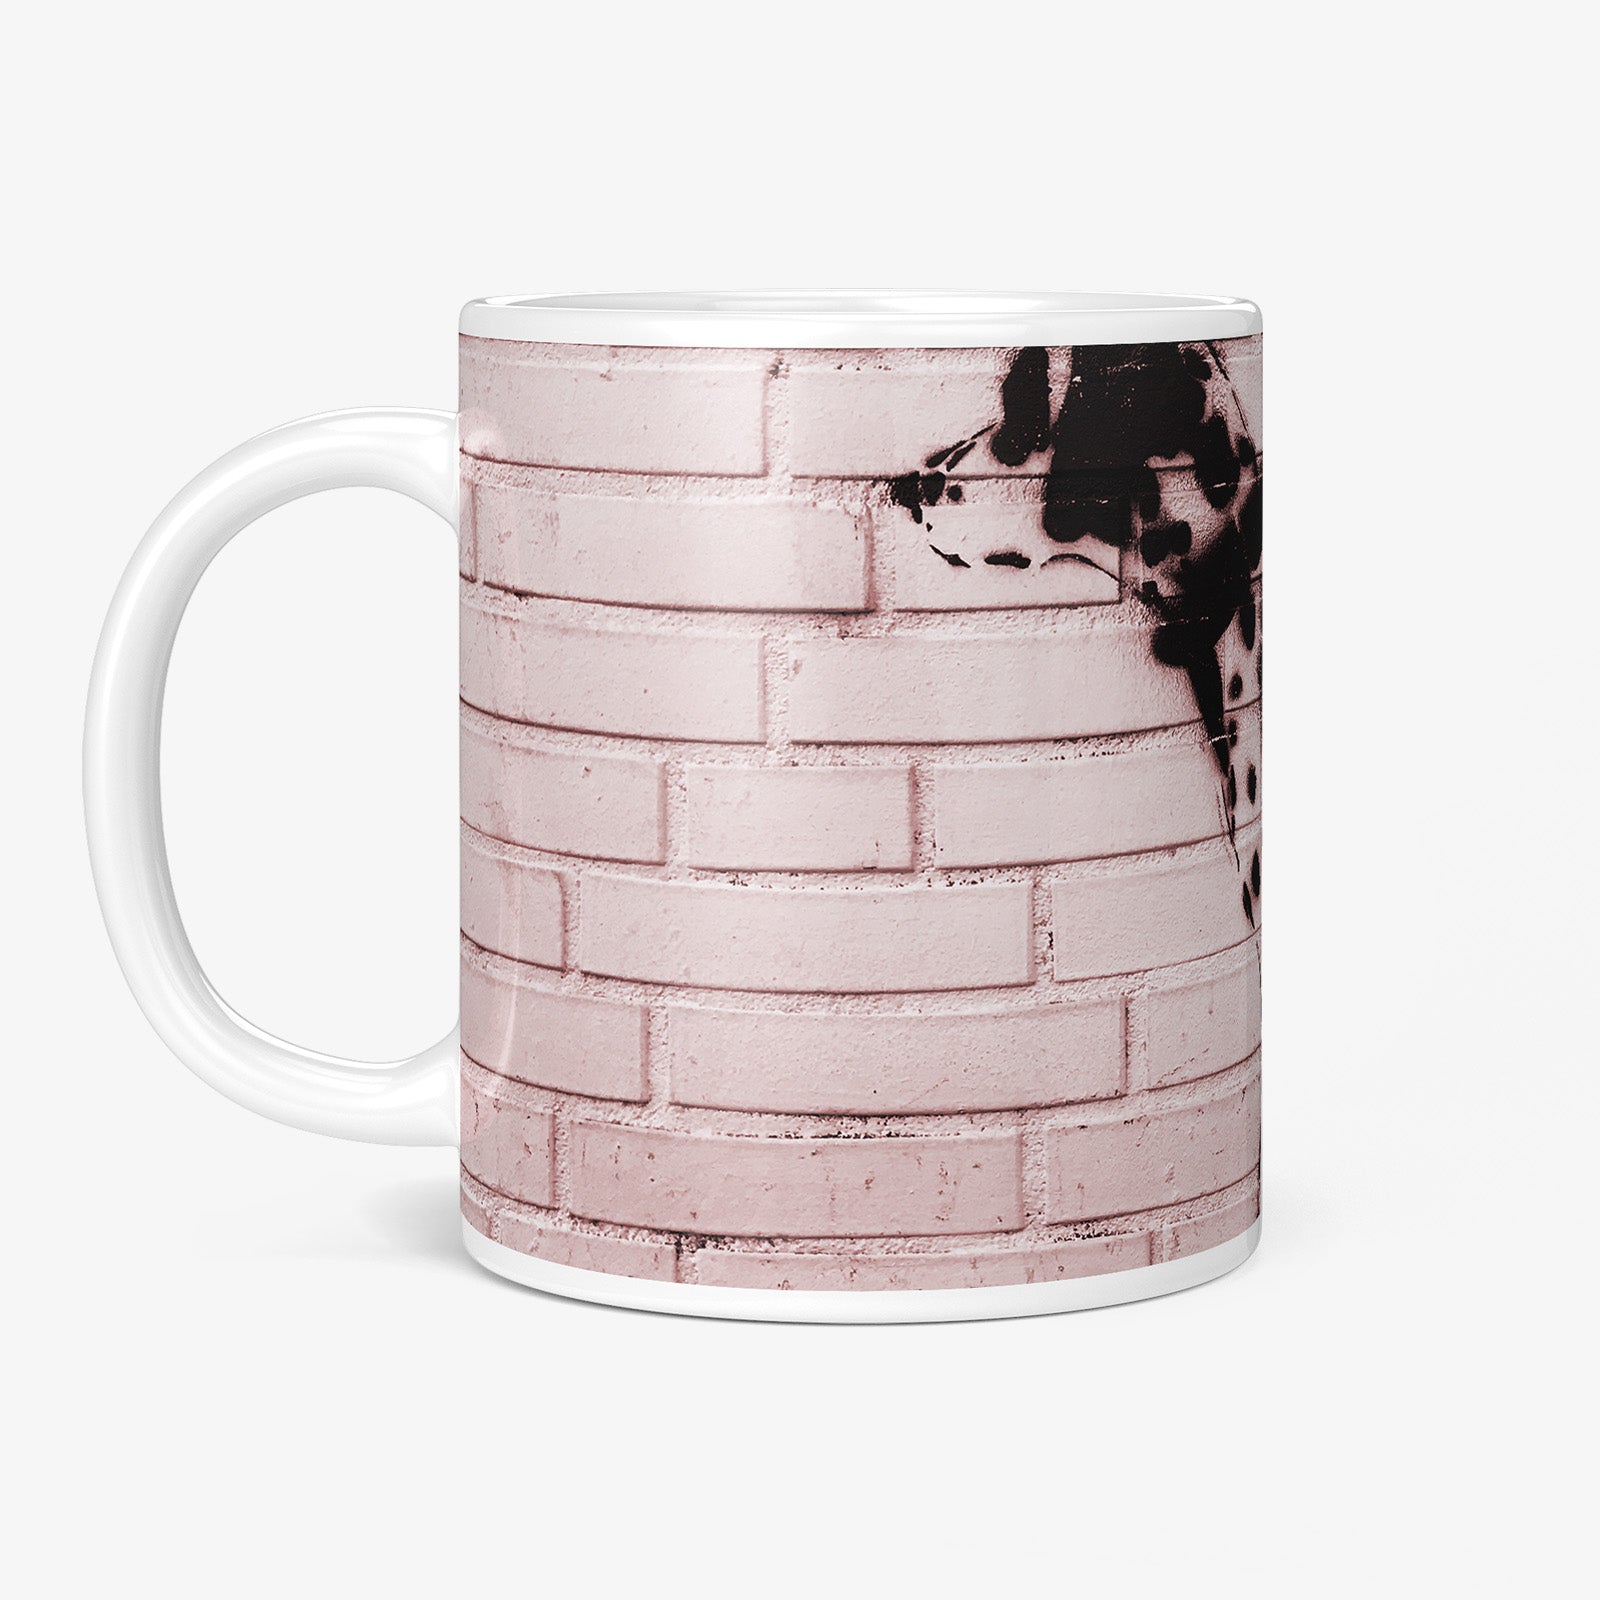 Be inspired by our Urban Art Coffee Mug "Pink Dalmatian" from Hamburg. This mug features an 11oz size with the handle on the left.